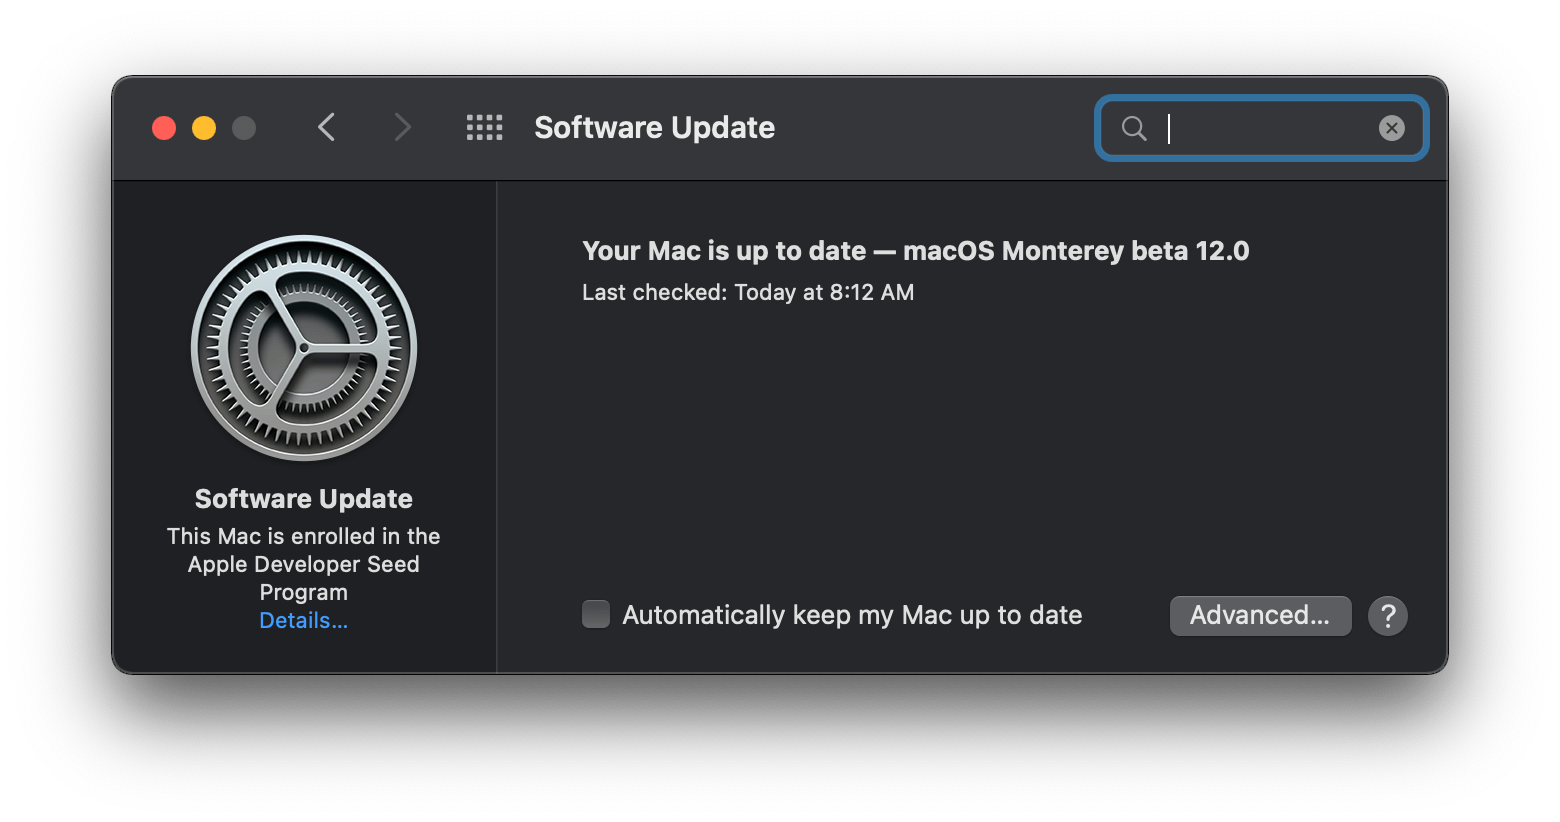 Make sure you have a backup plan before installing the Monterey public beta.